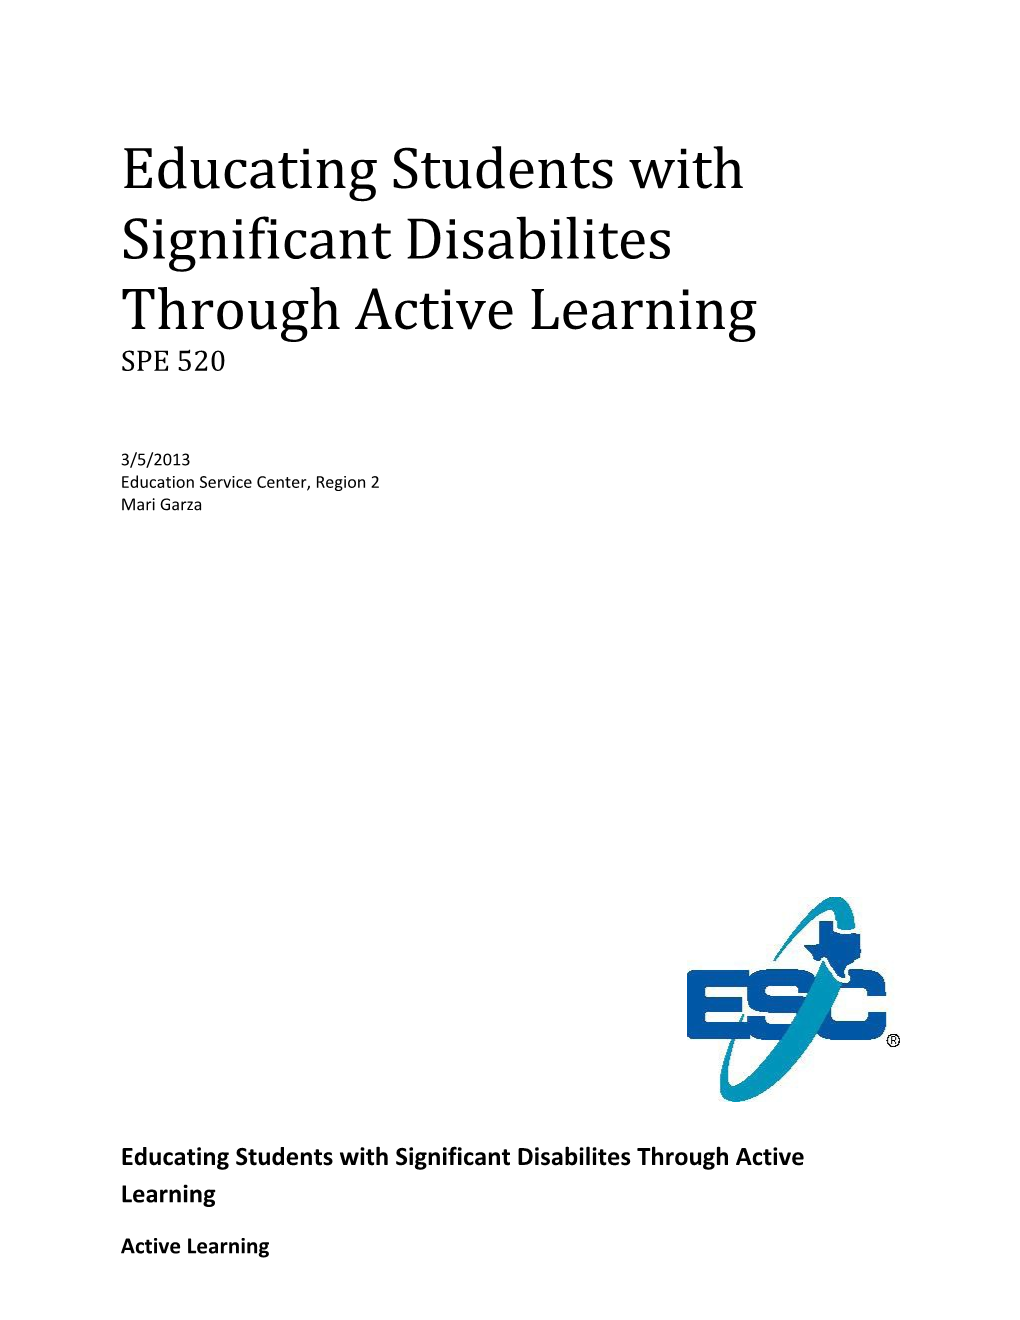 Educating Students with Significant Disabilites Through Active Learning